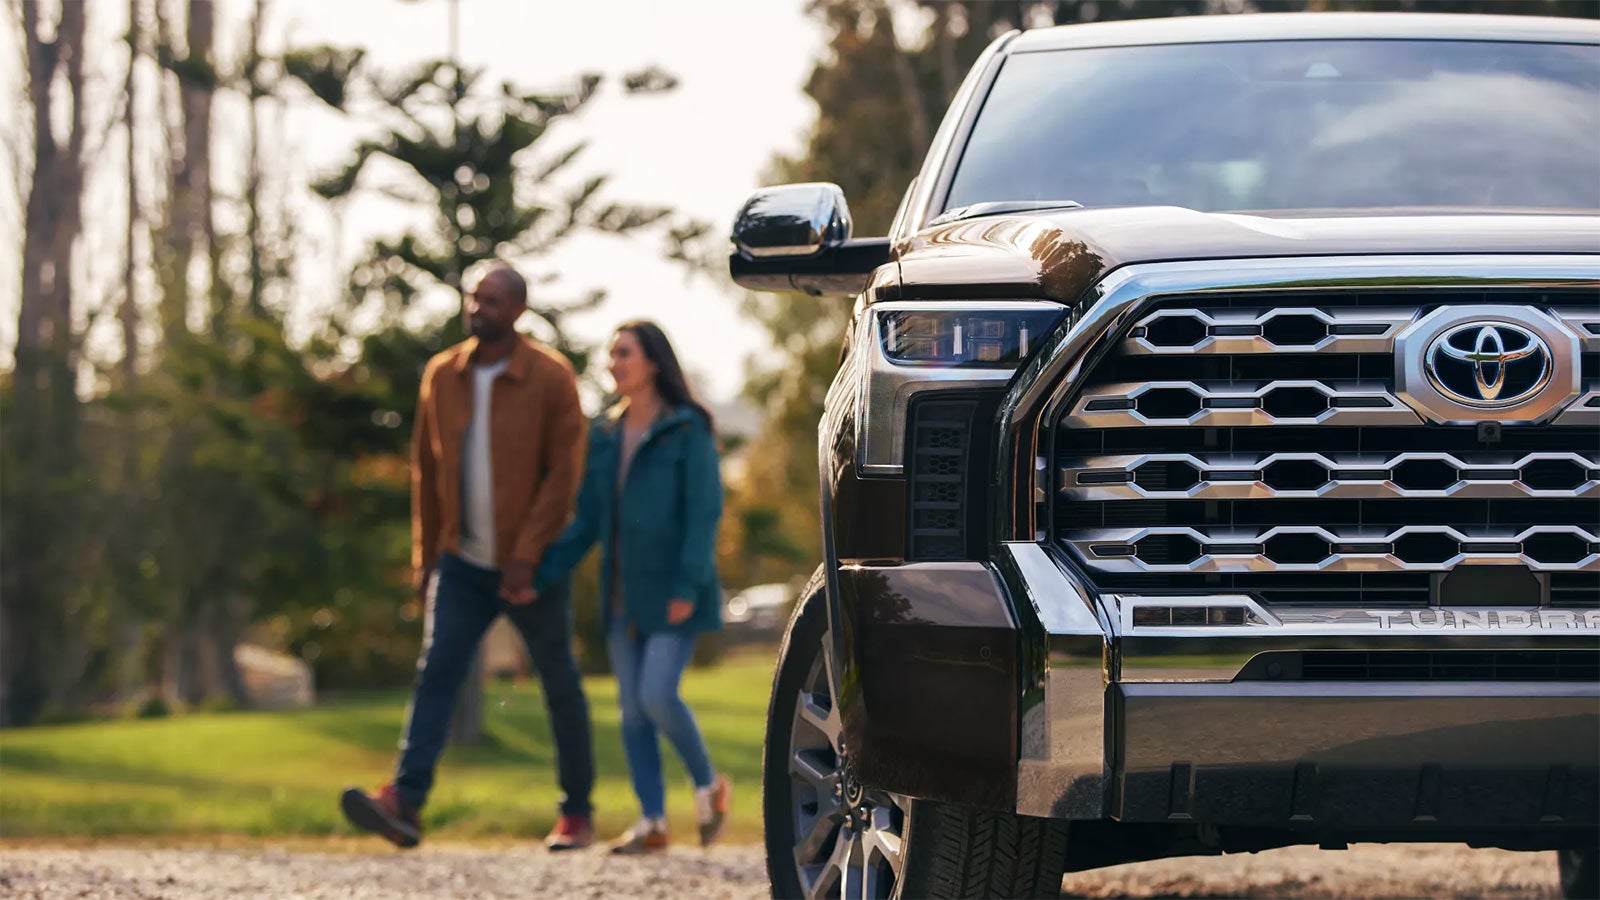 2022 Toyota Tundra Gallery | Royal Moore Toyota in Hillsboro OR